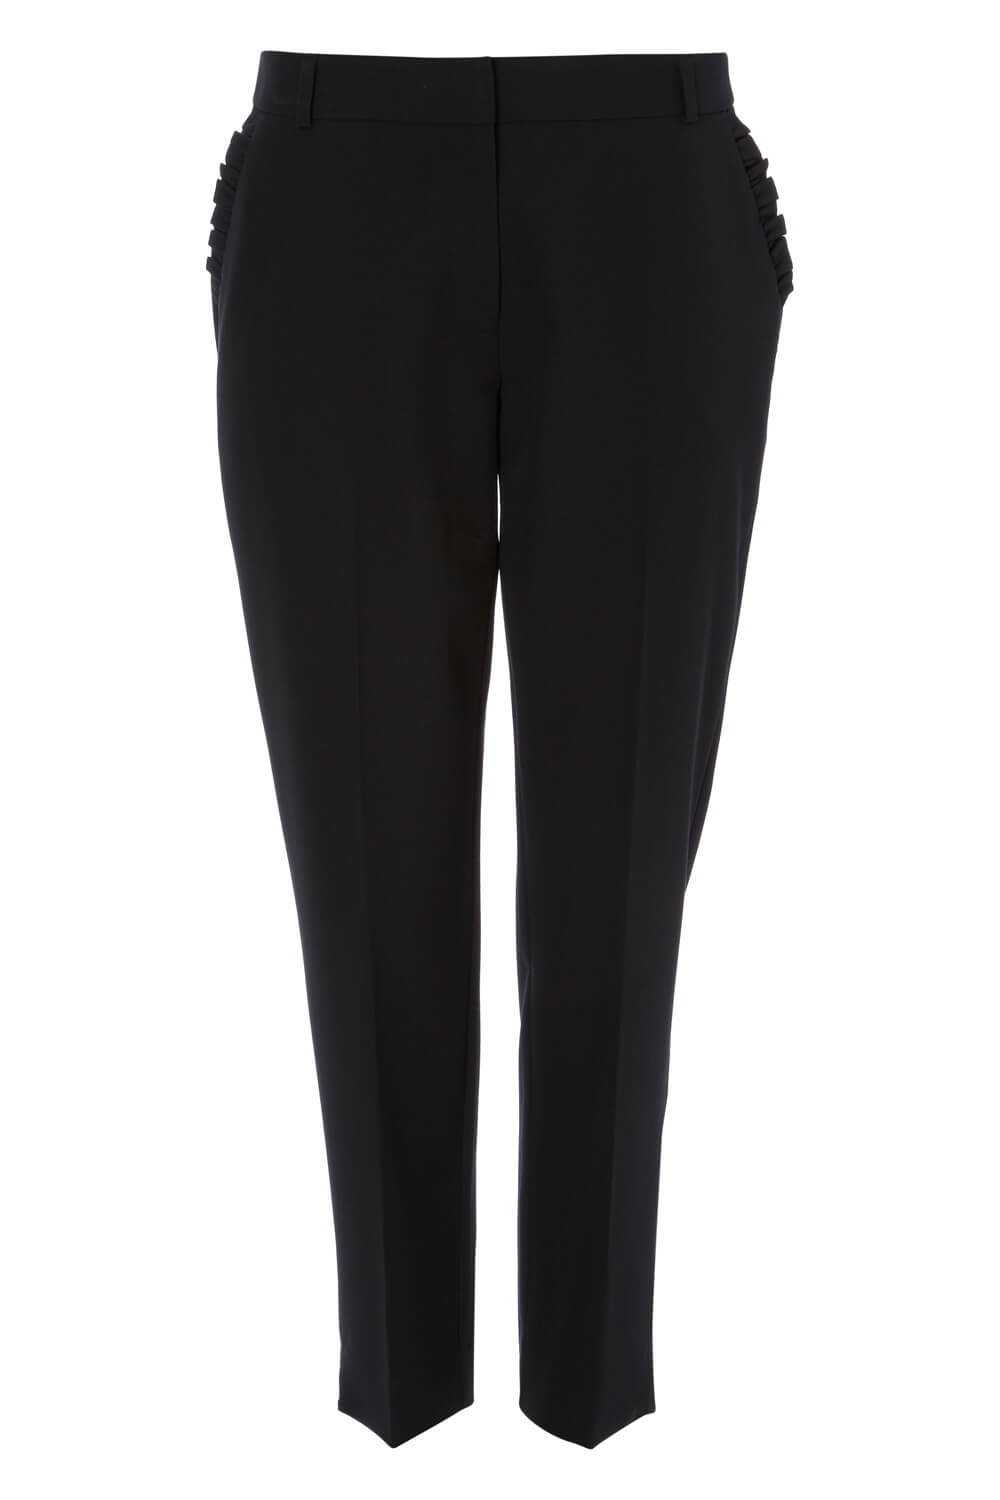 Black Tapered Frill Detail Trousers, Image 5 of 5